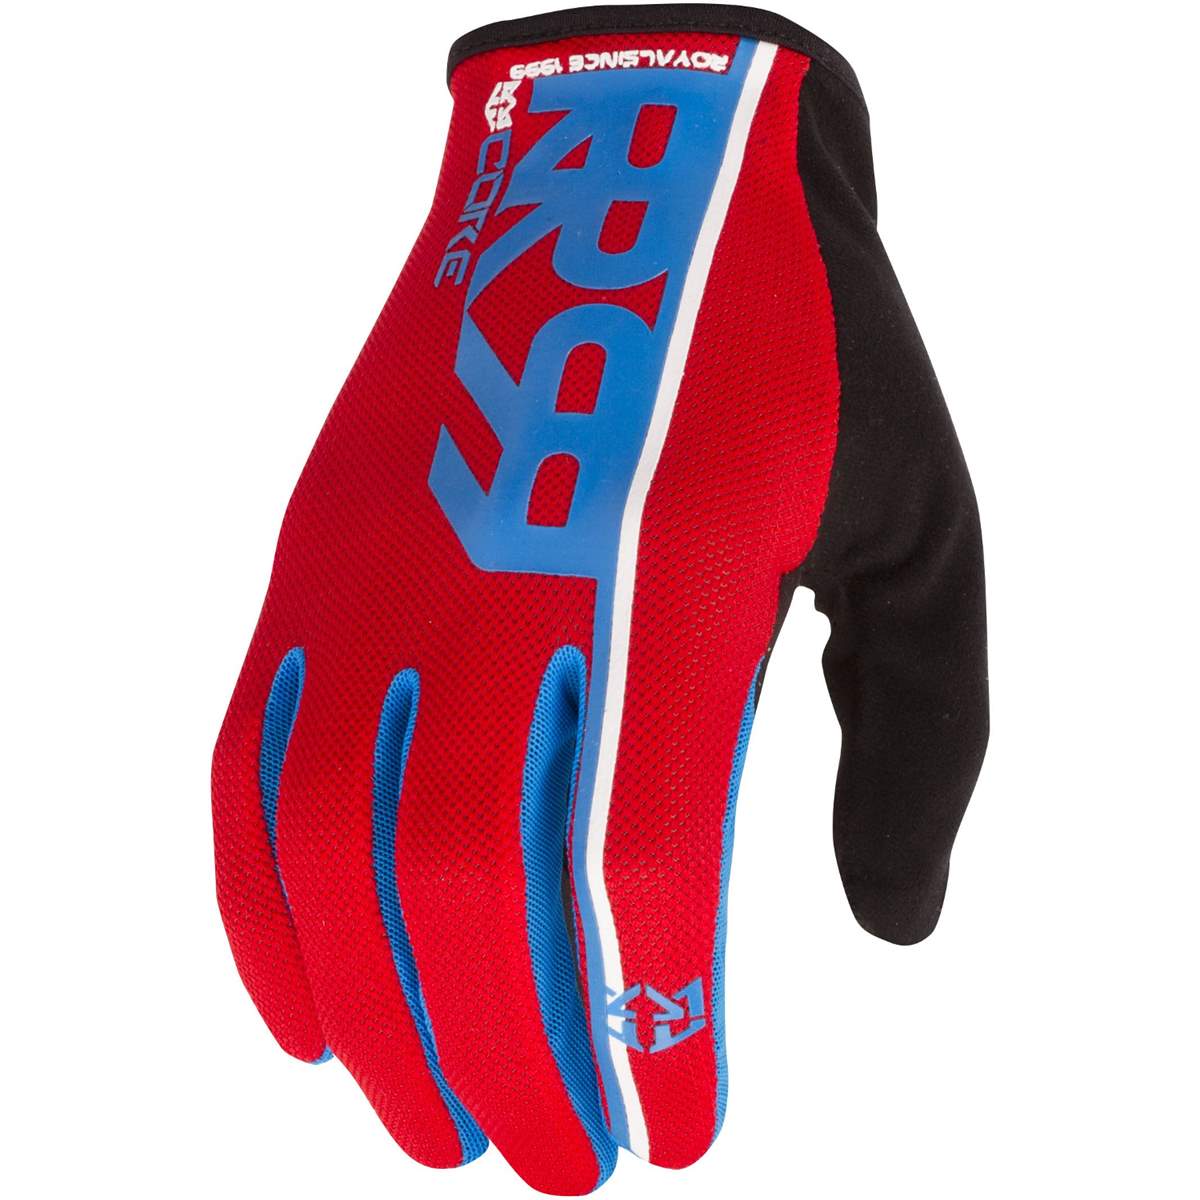 Royal Racing Gloves Core Red/Sky Blue/Black